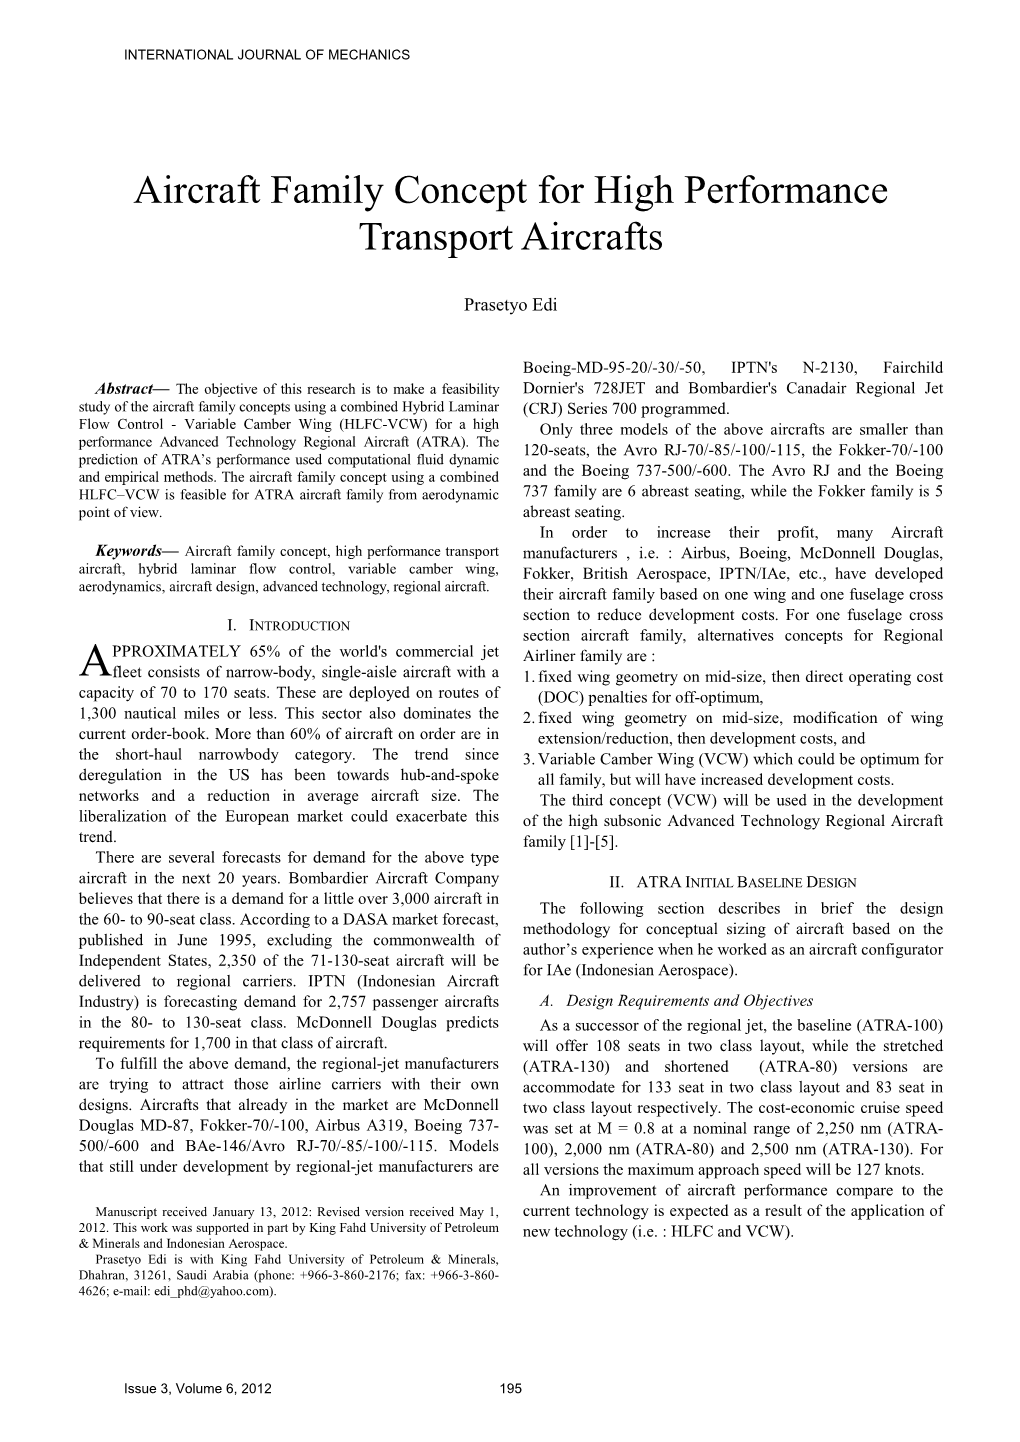 Aircraft Family Concept for High Performance Transport Aircrafts